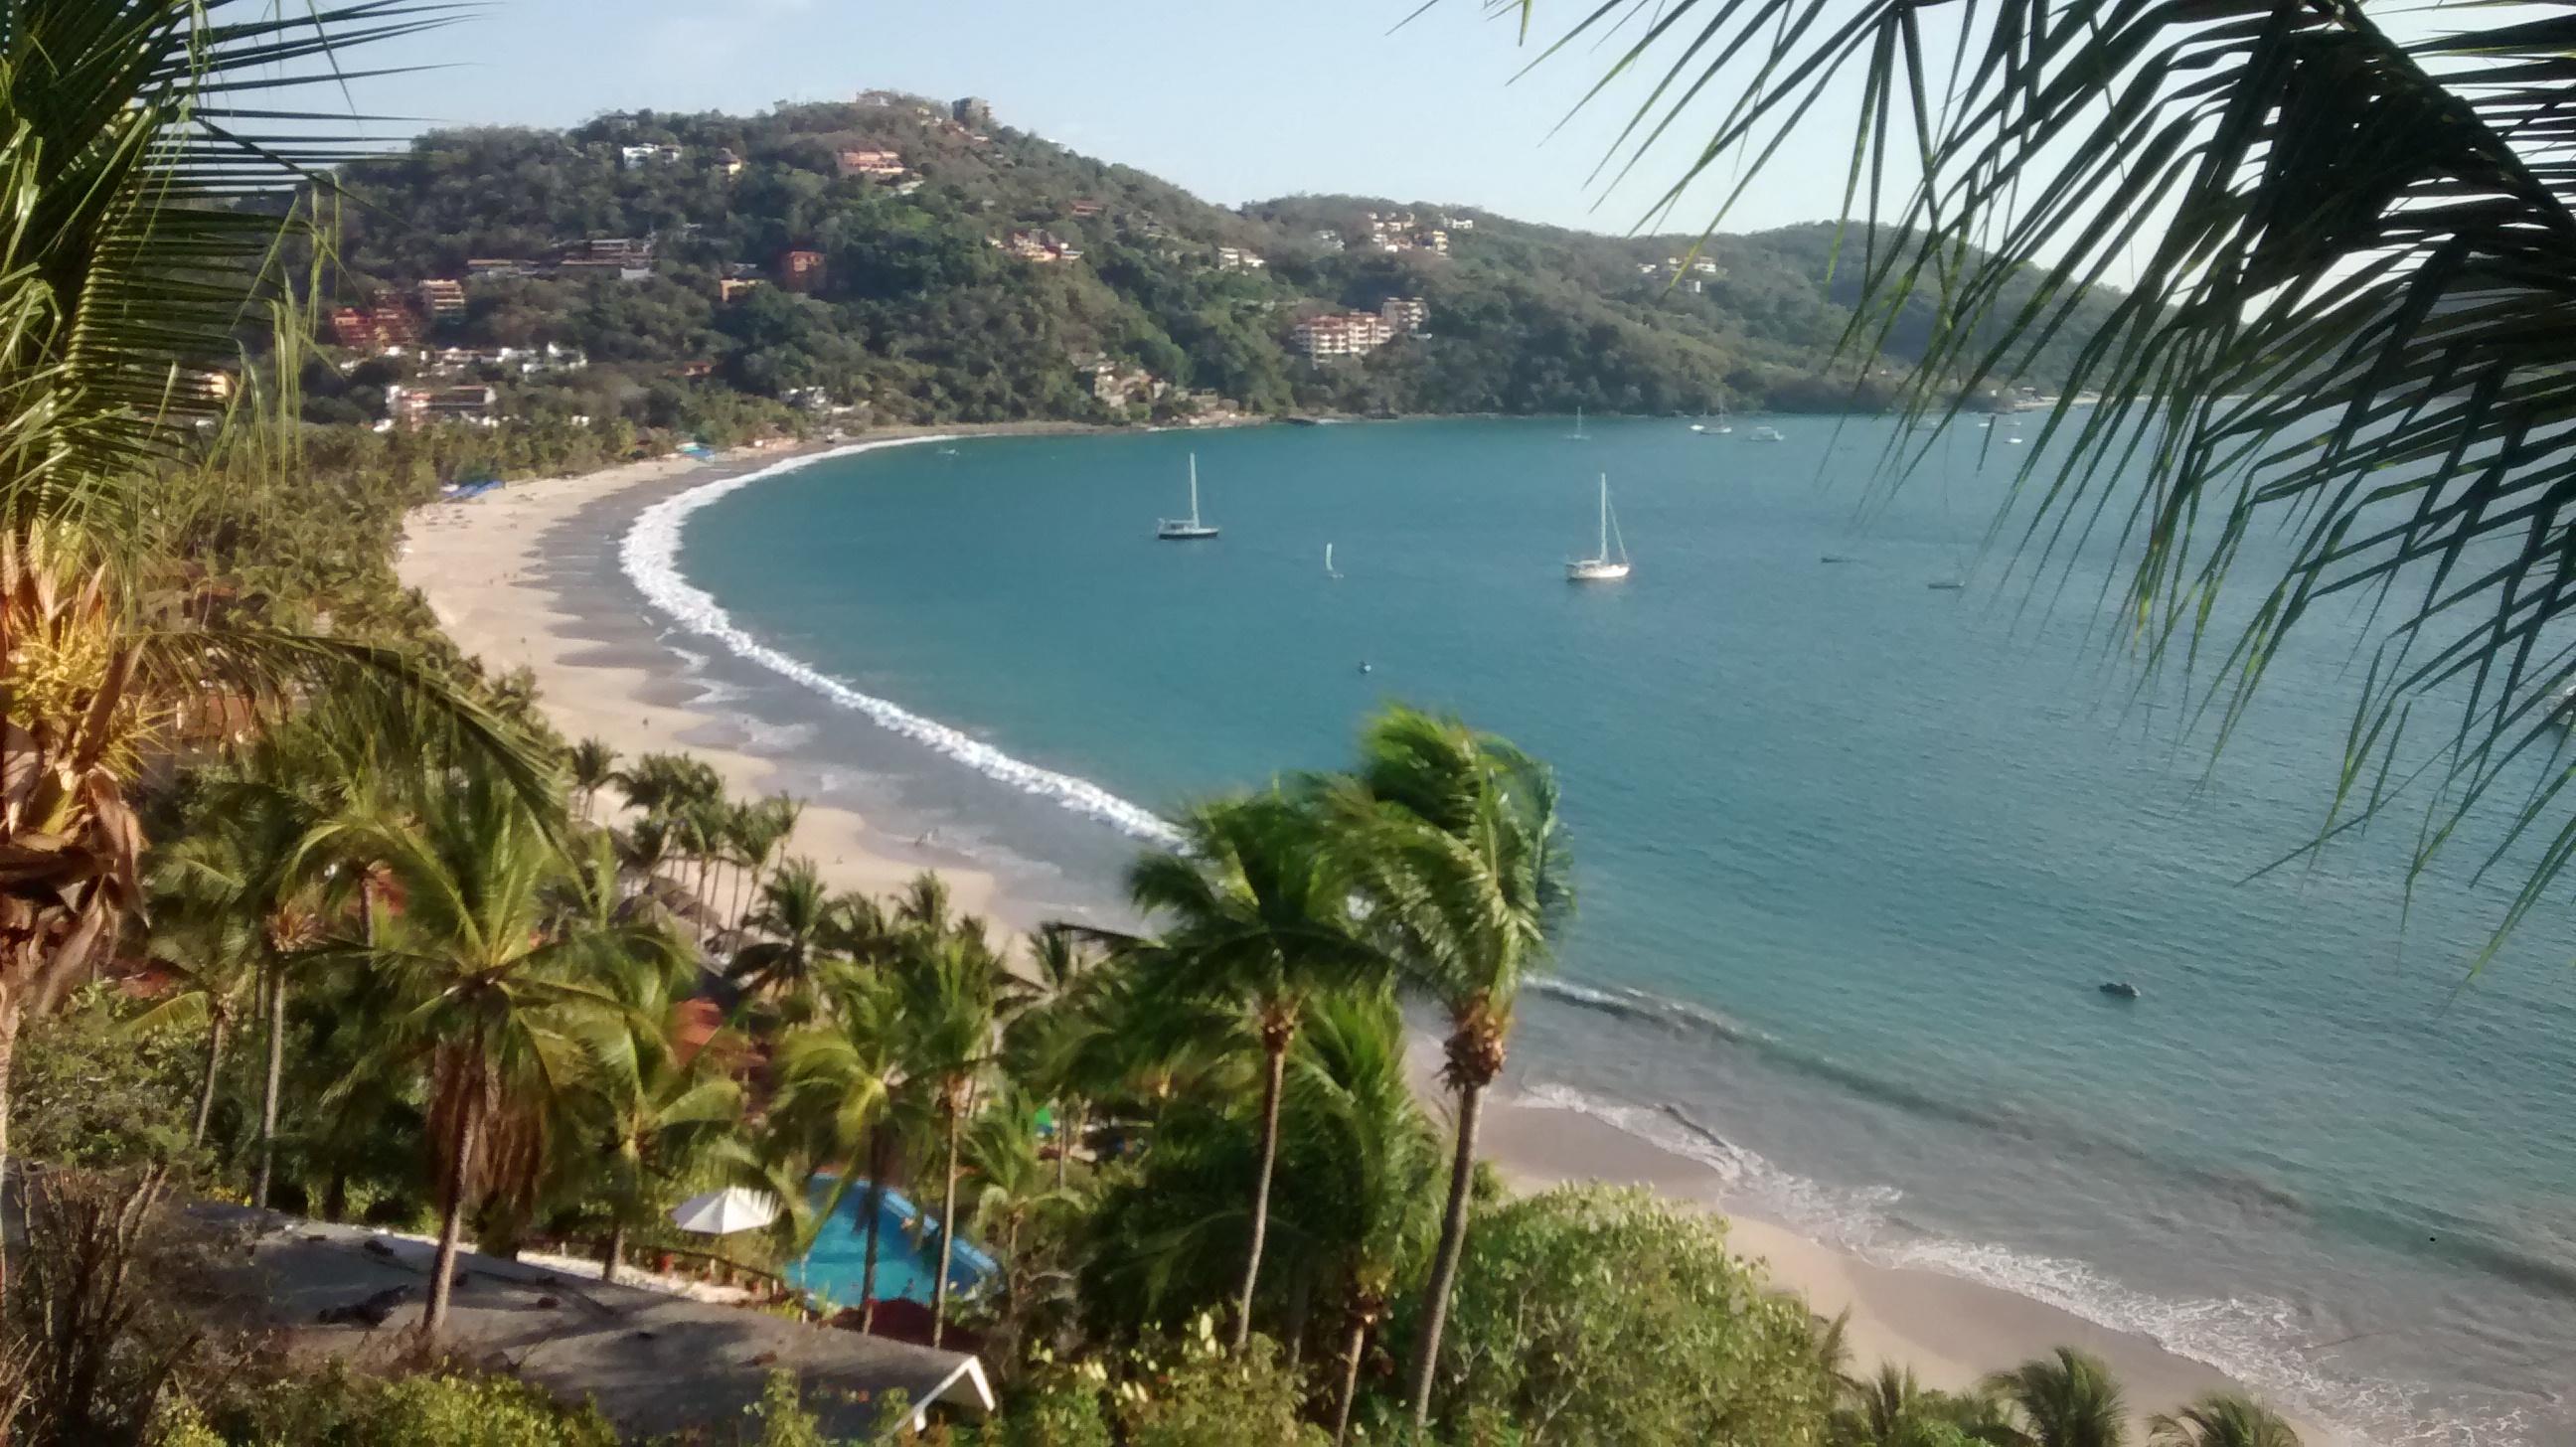 HOTEL CATALINA BEACH RESORT ZIHUATANEJO 4* (Mexico) - from C$ 70 | iBOOKED